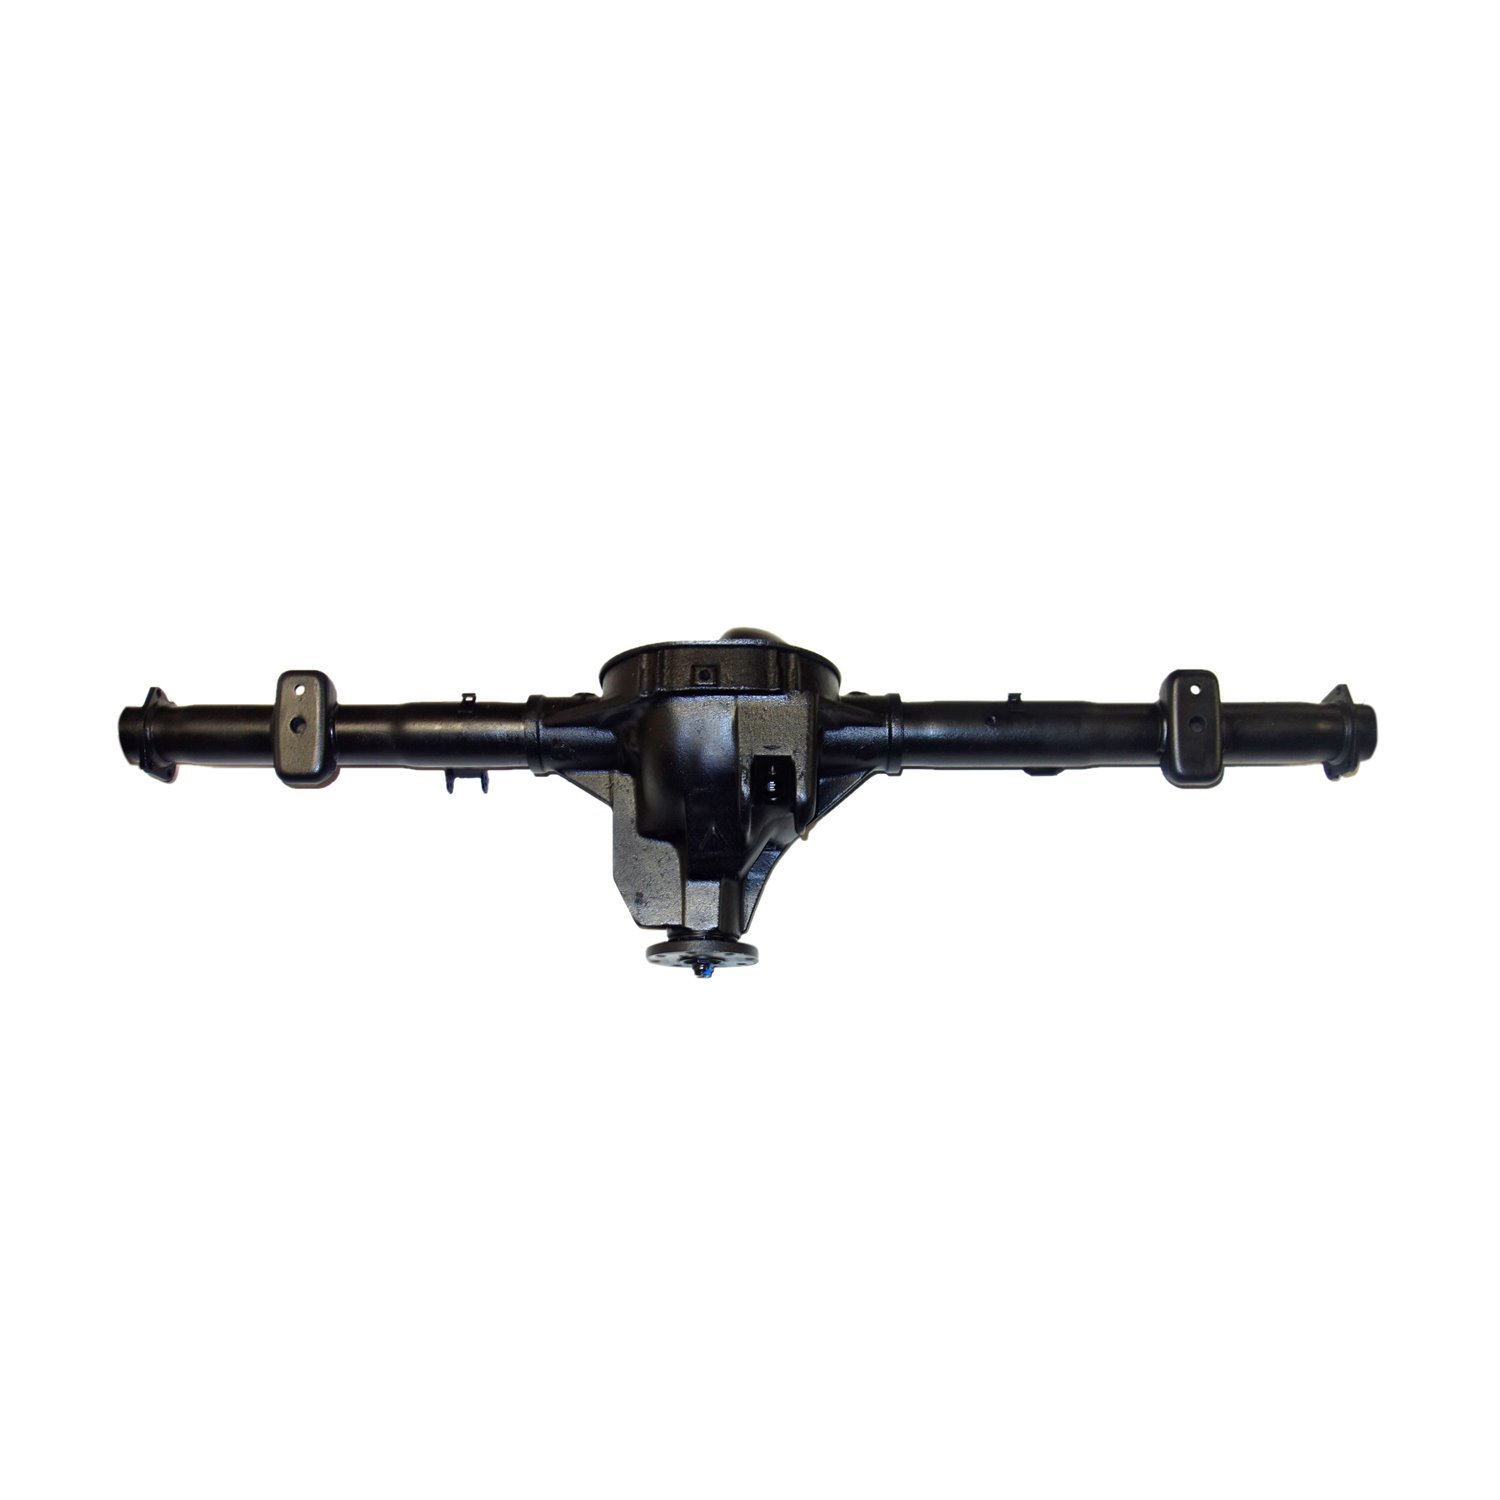 Remanufactured Complete Axle Assembly for Ford 8.8" 94-97 Ford Ranger 3.55 , 10" Brakes